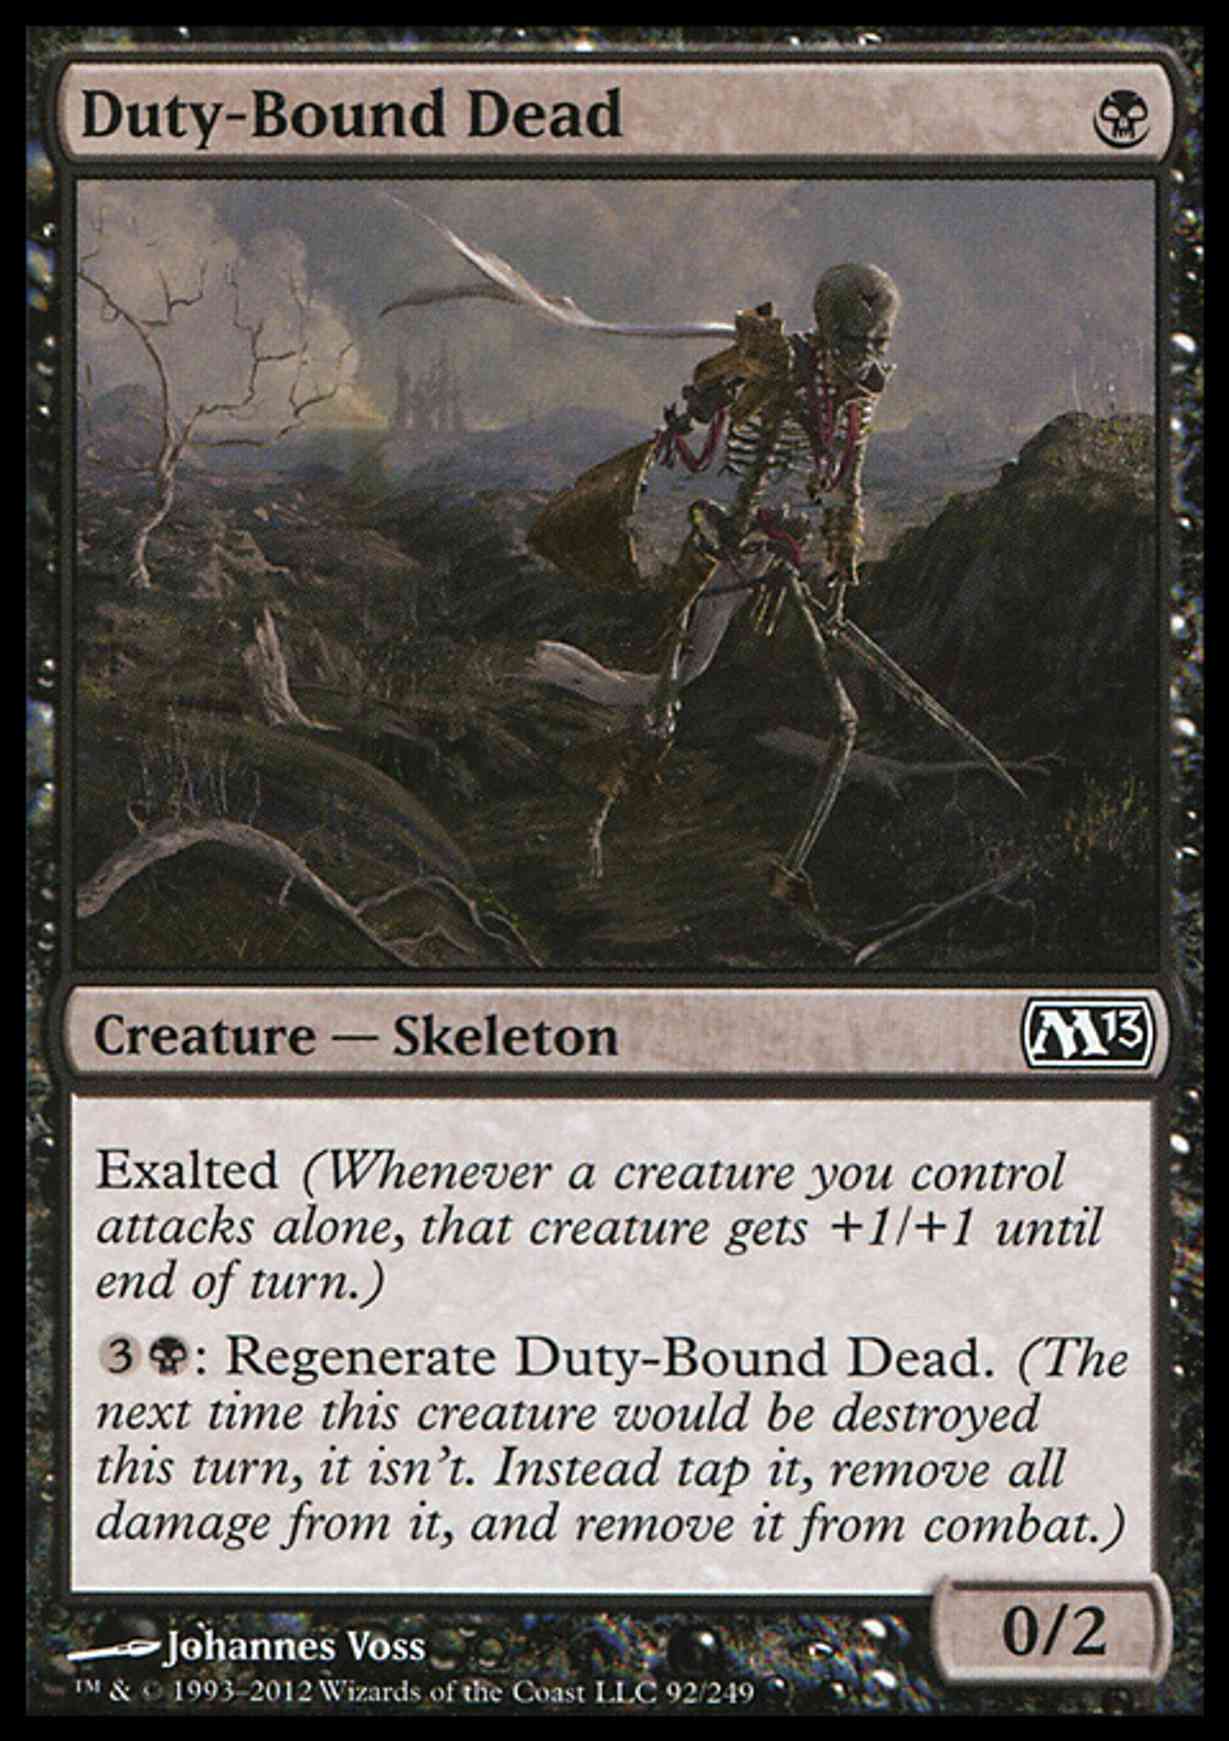 Duty-Bound Dead magic card front